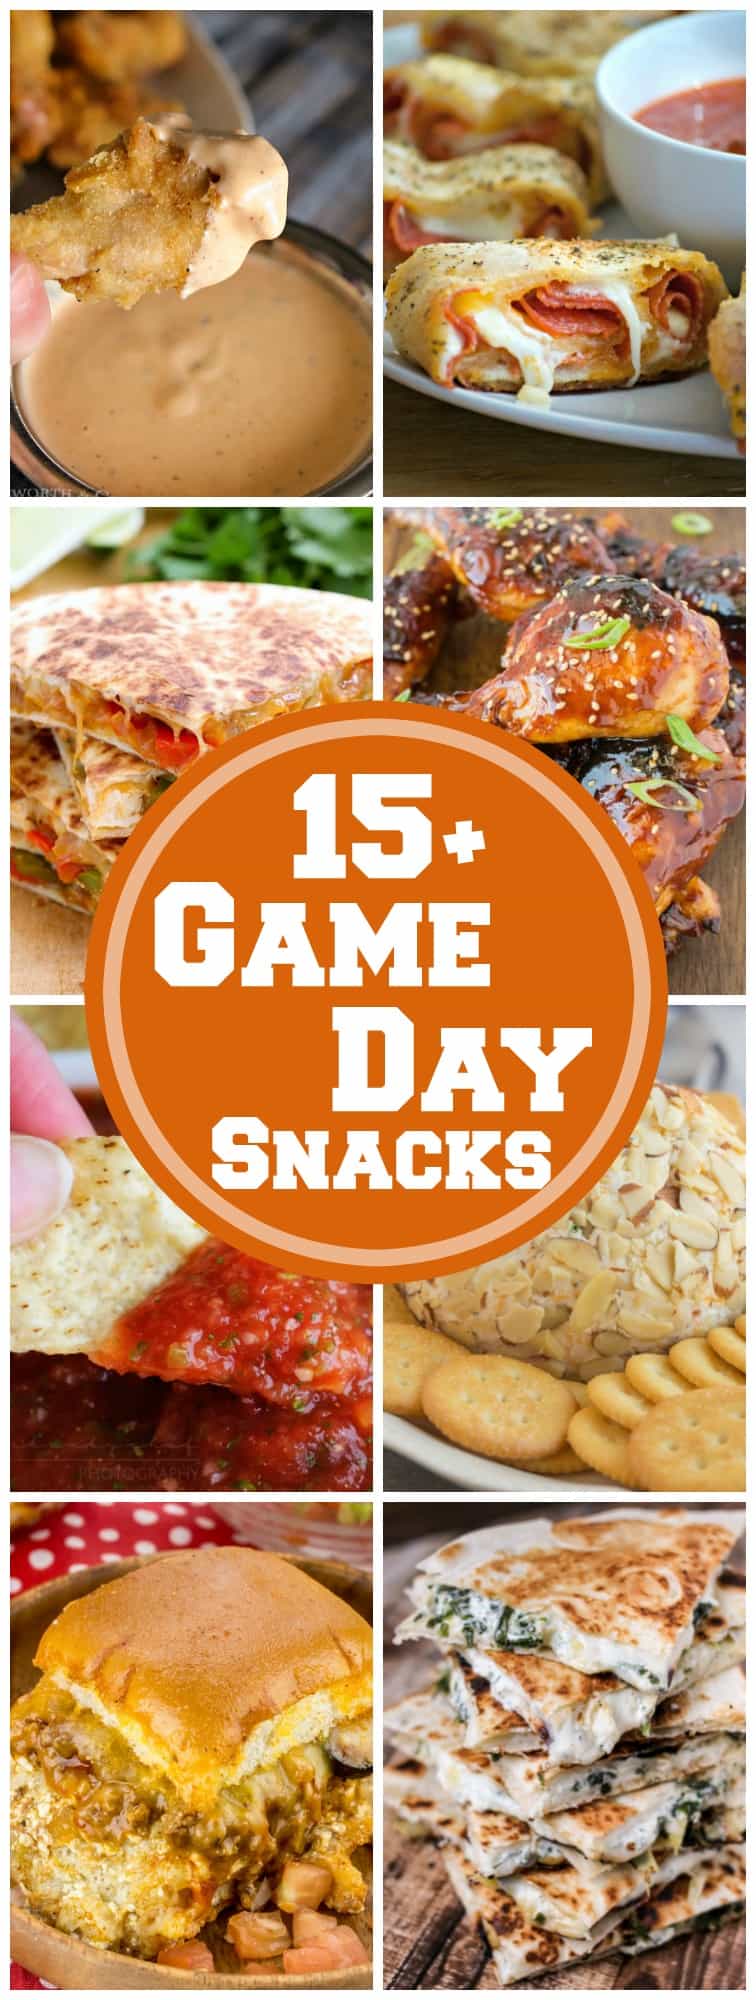 15+ Game Day Snacks to make sure your get-together is complete. With these finger foods from savory to sweet, no one will be going hungry at your party!